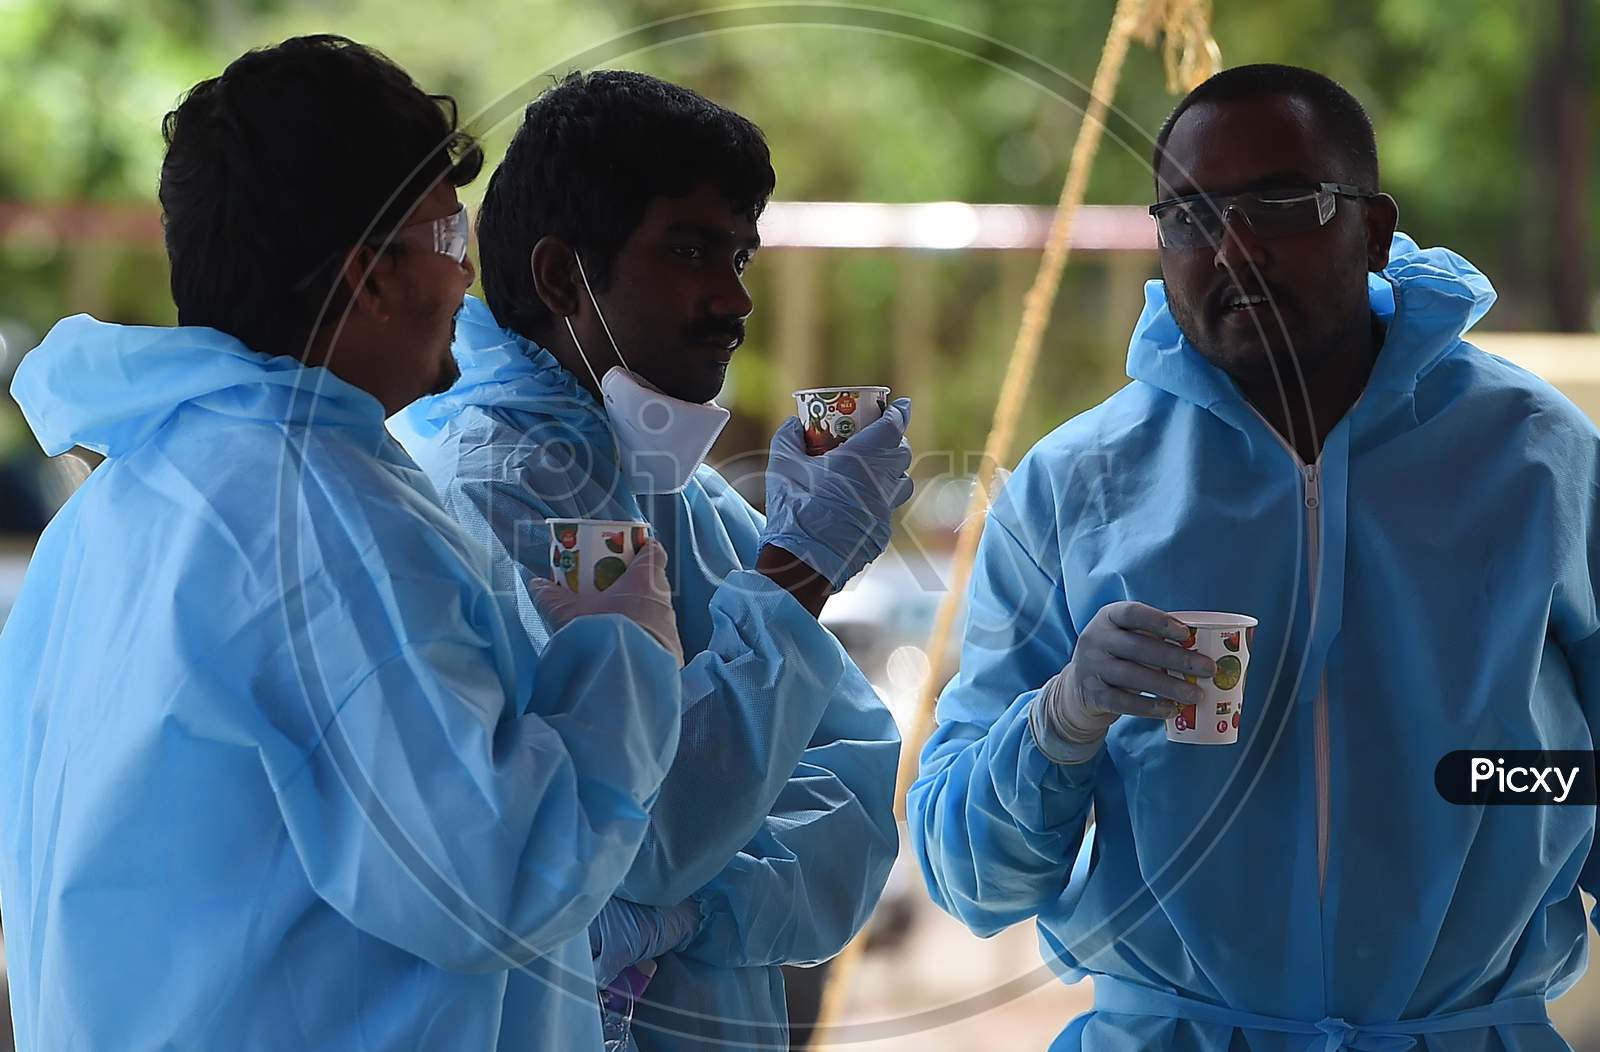 Health Workers Take A Break Before Conducting The Thermal Screening Of Migrant Labourers From Bihar During The Ongoing Nationwide Lockdown In The Wake Of Coronavirus Pandemic, In Chennai